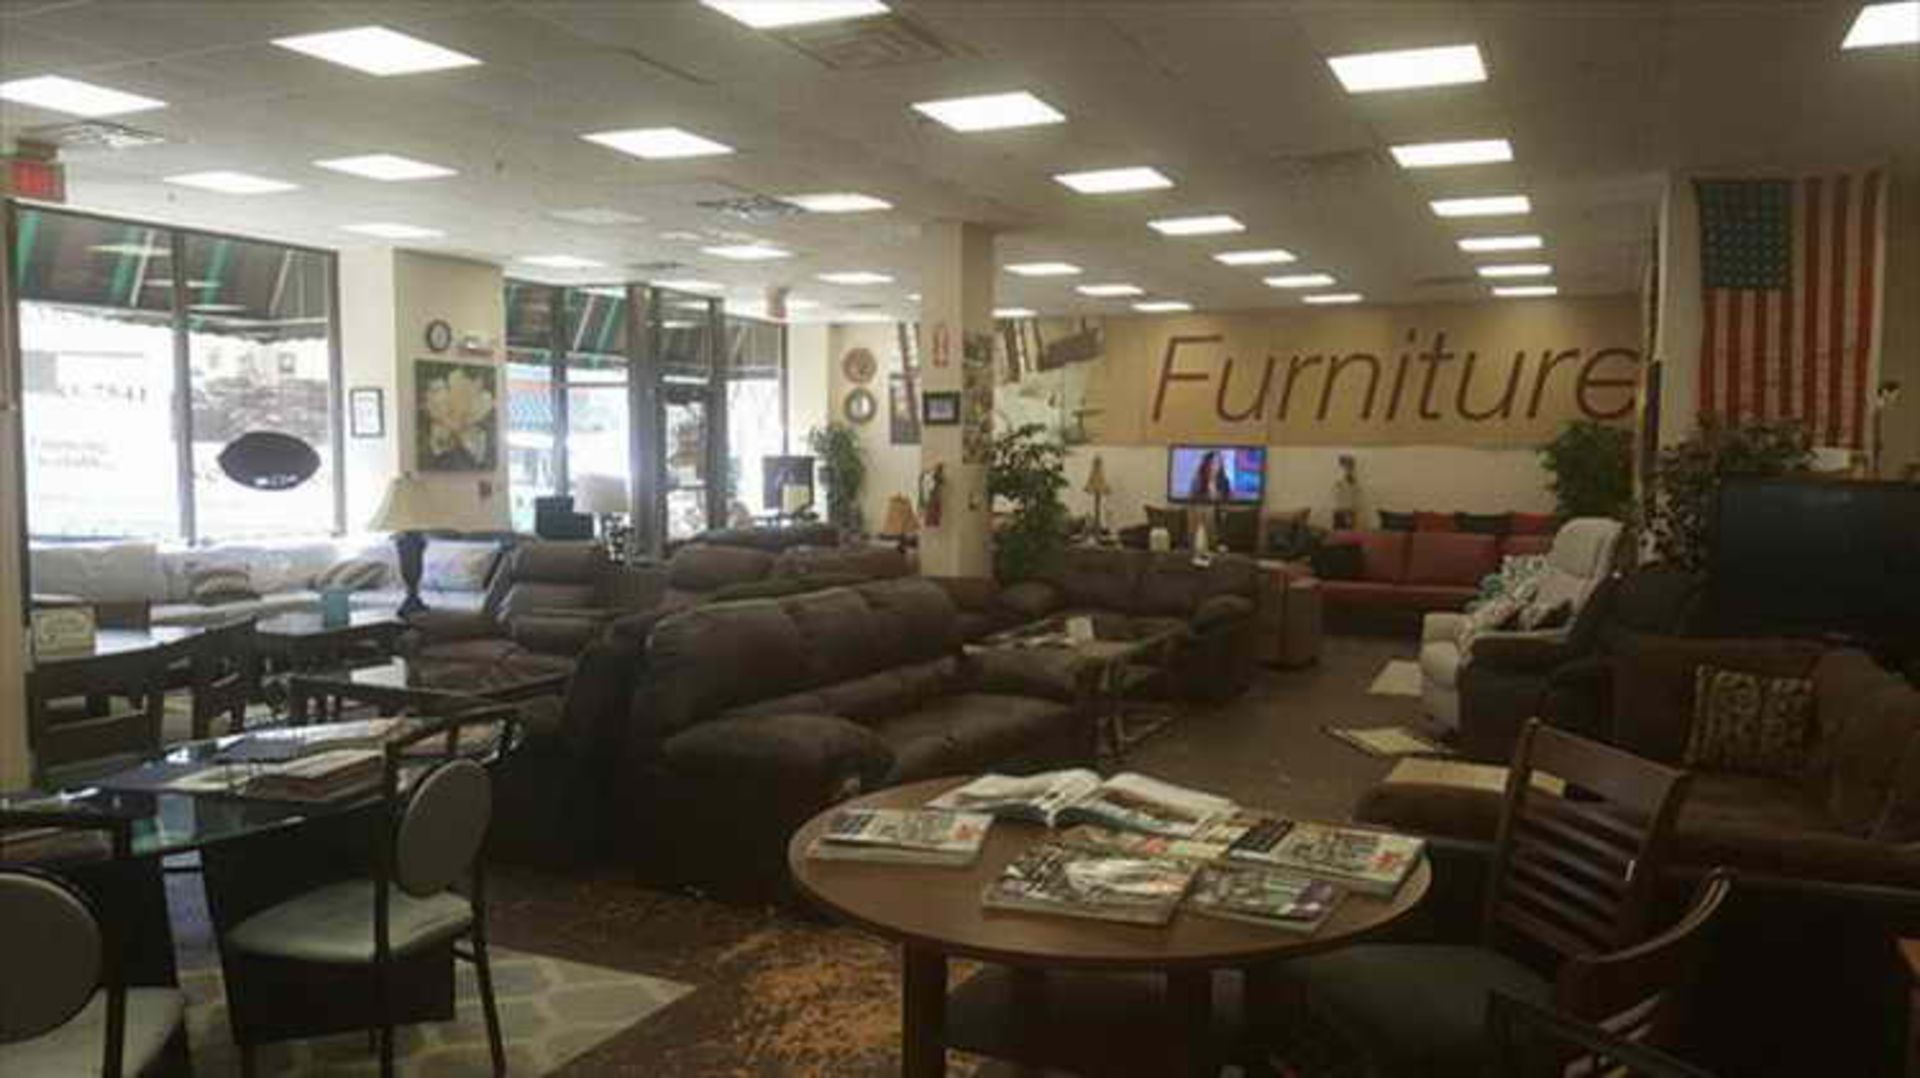 DON'T: sacrifice your brand identity for discounted furniture